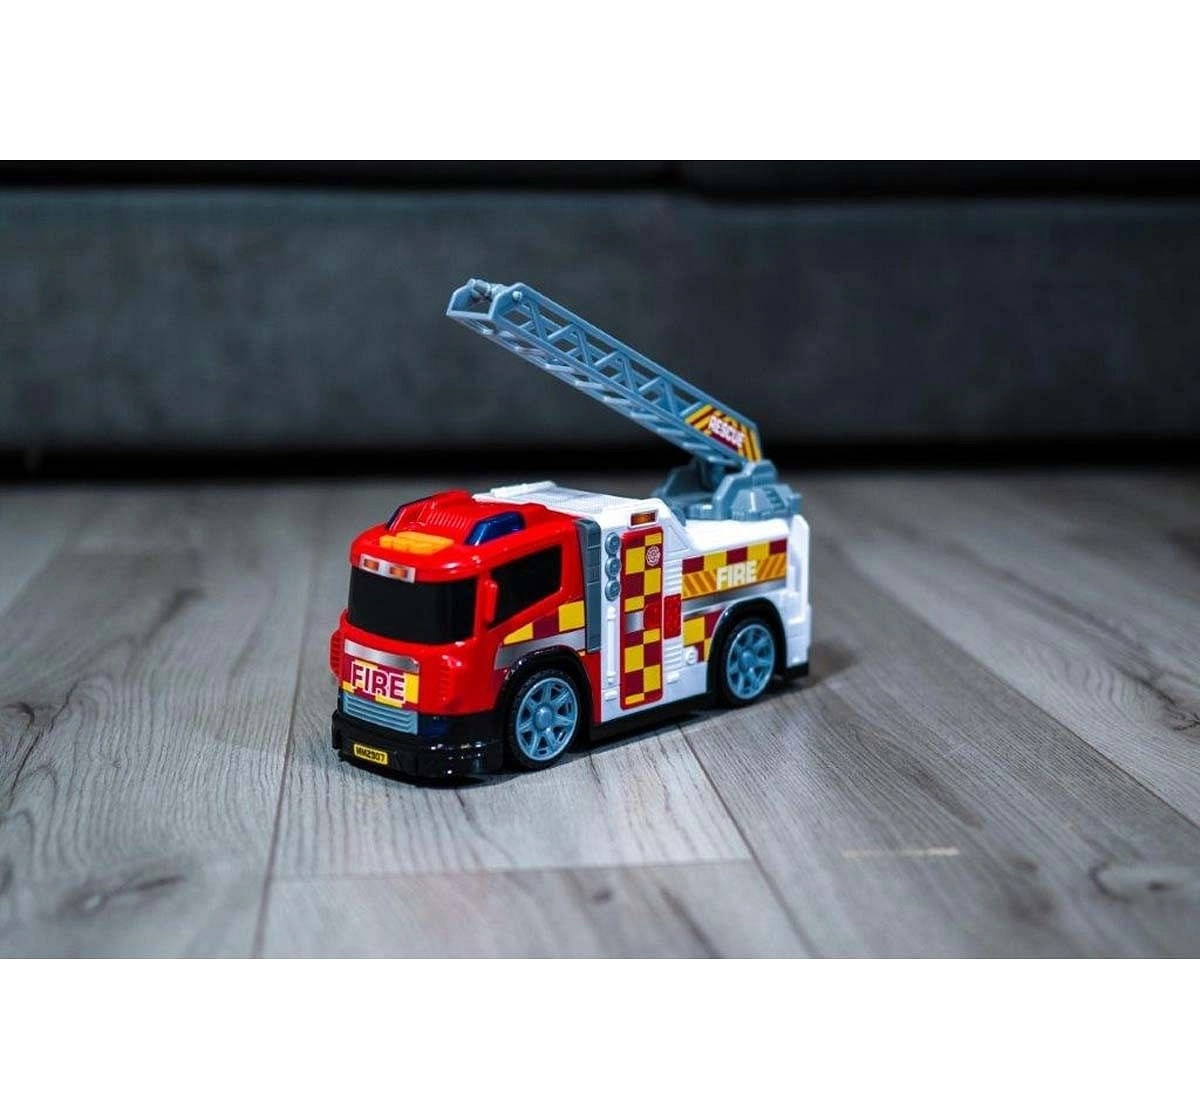 Teamsterz Light And Sound Mighty Moverz Fire Engine Vehicles for Kids Age 3Y+